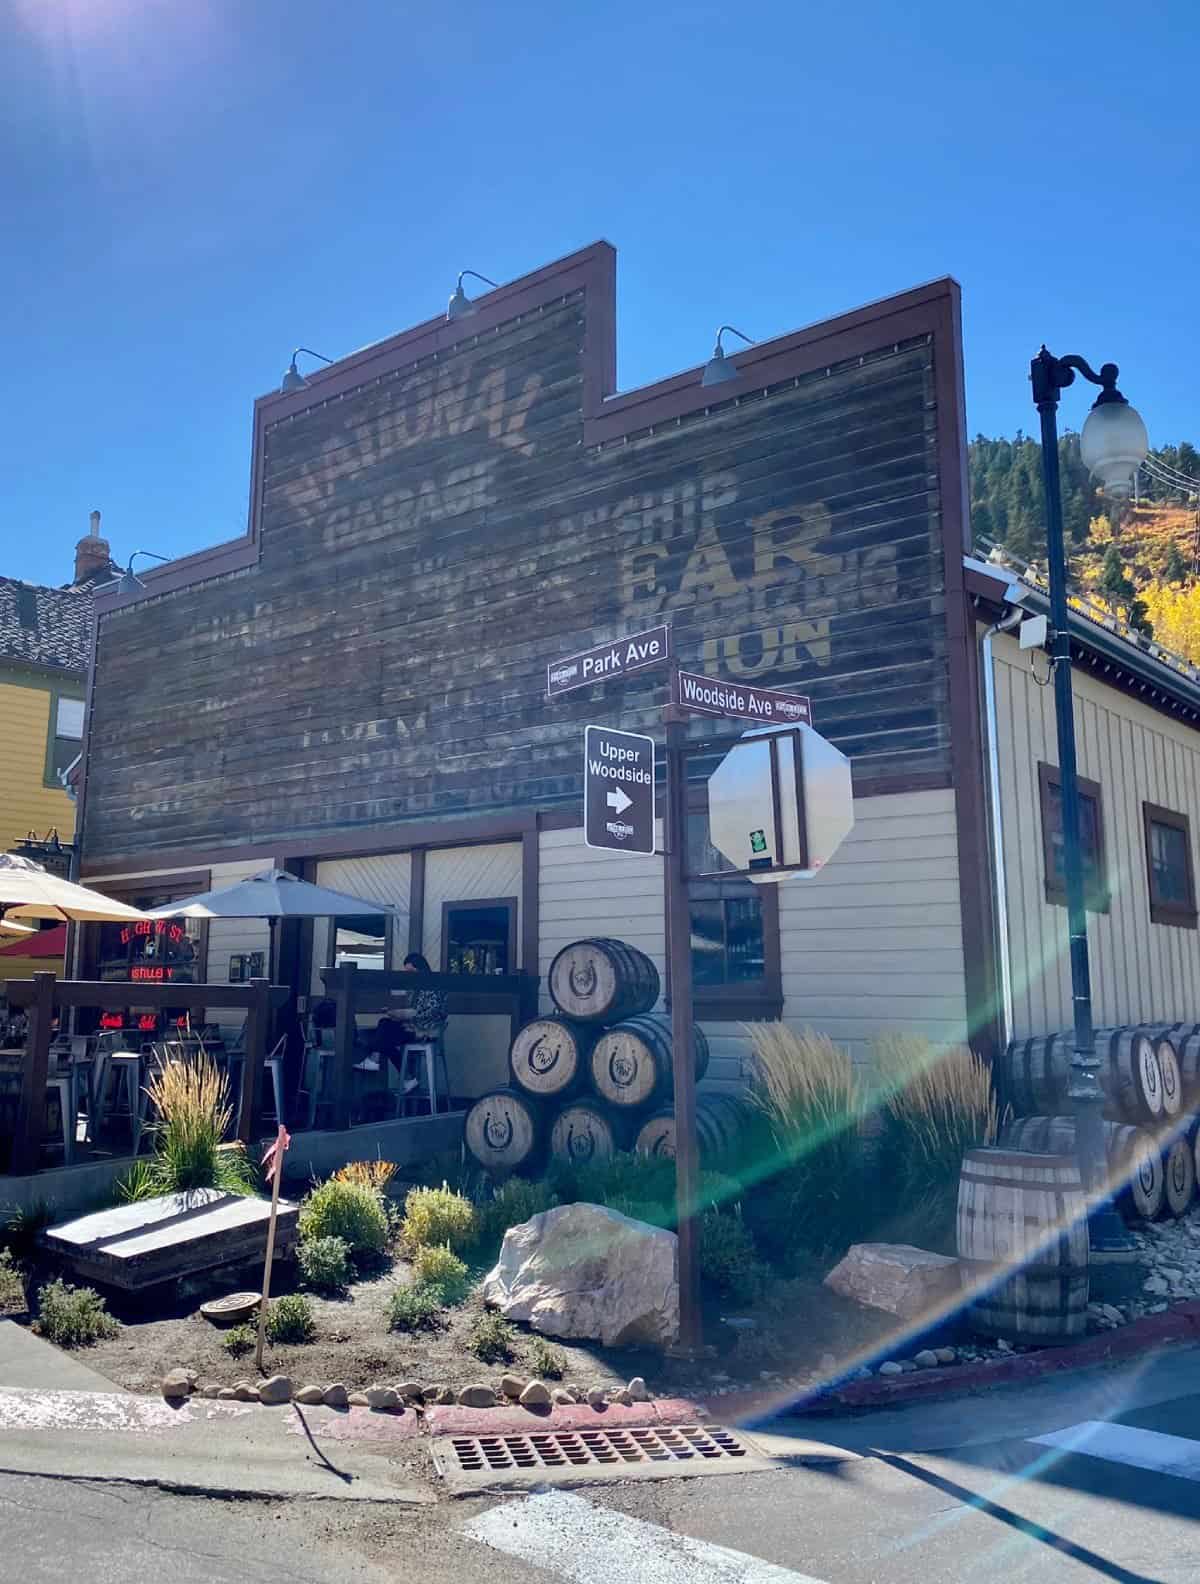 If you can't make it out to the High West Distillery, stop by their saloon in town instead - best Park City restaurants